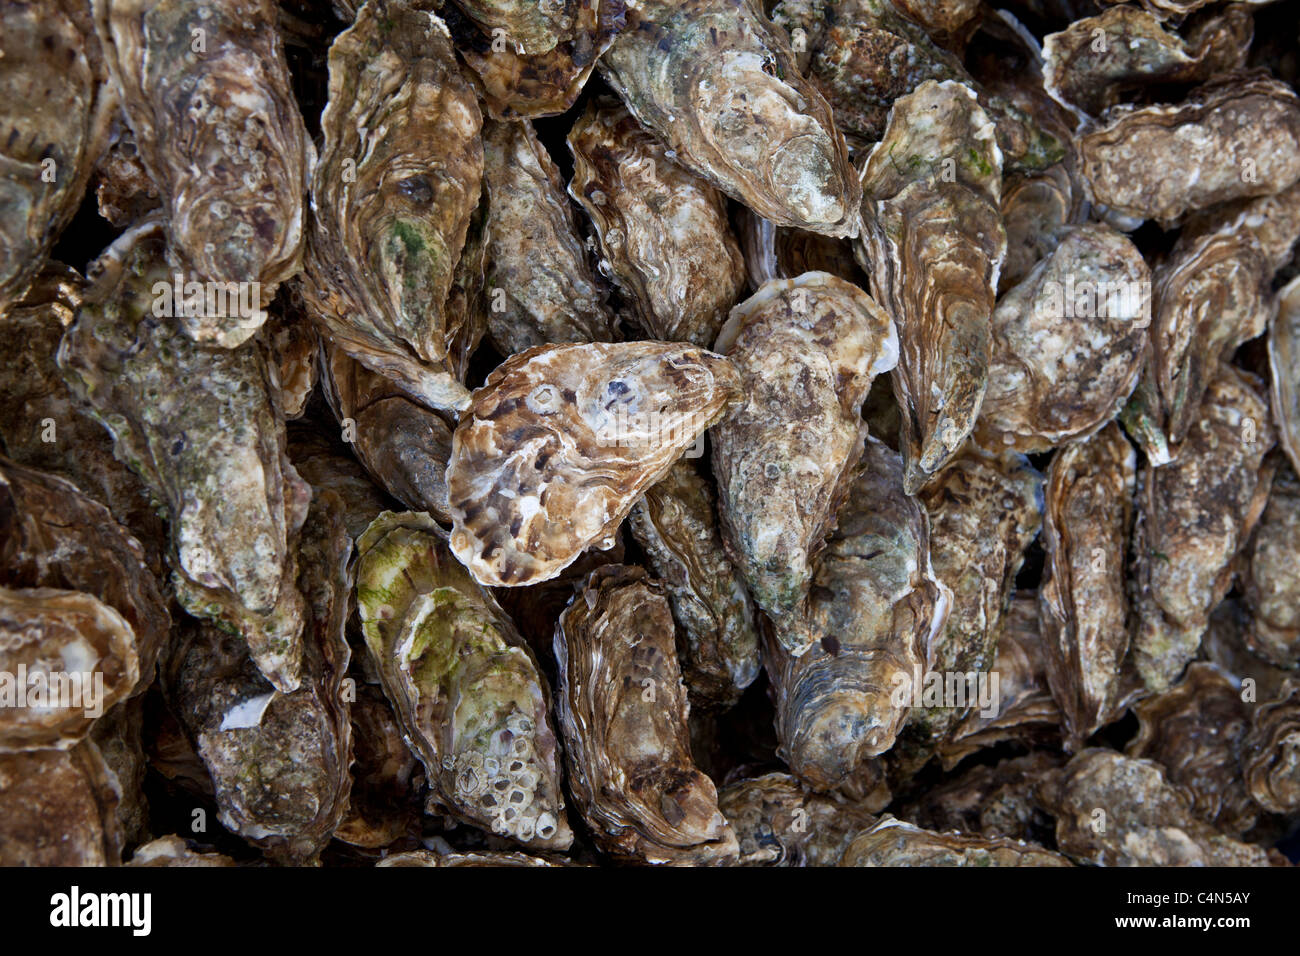 Freshly-caught live oysters, fin de claires, on sale at food market at La Reole in Bordeaux region of France Stock Photo